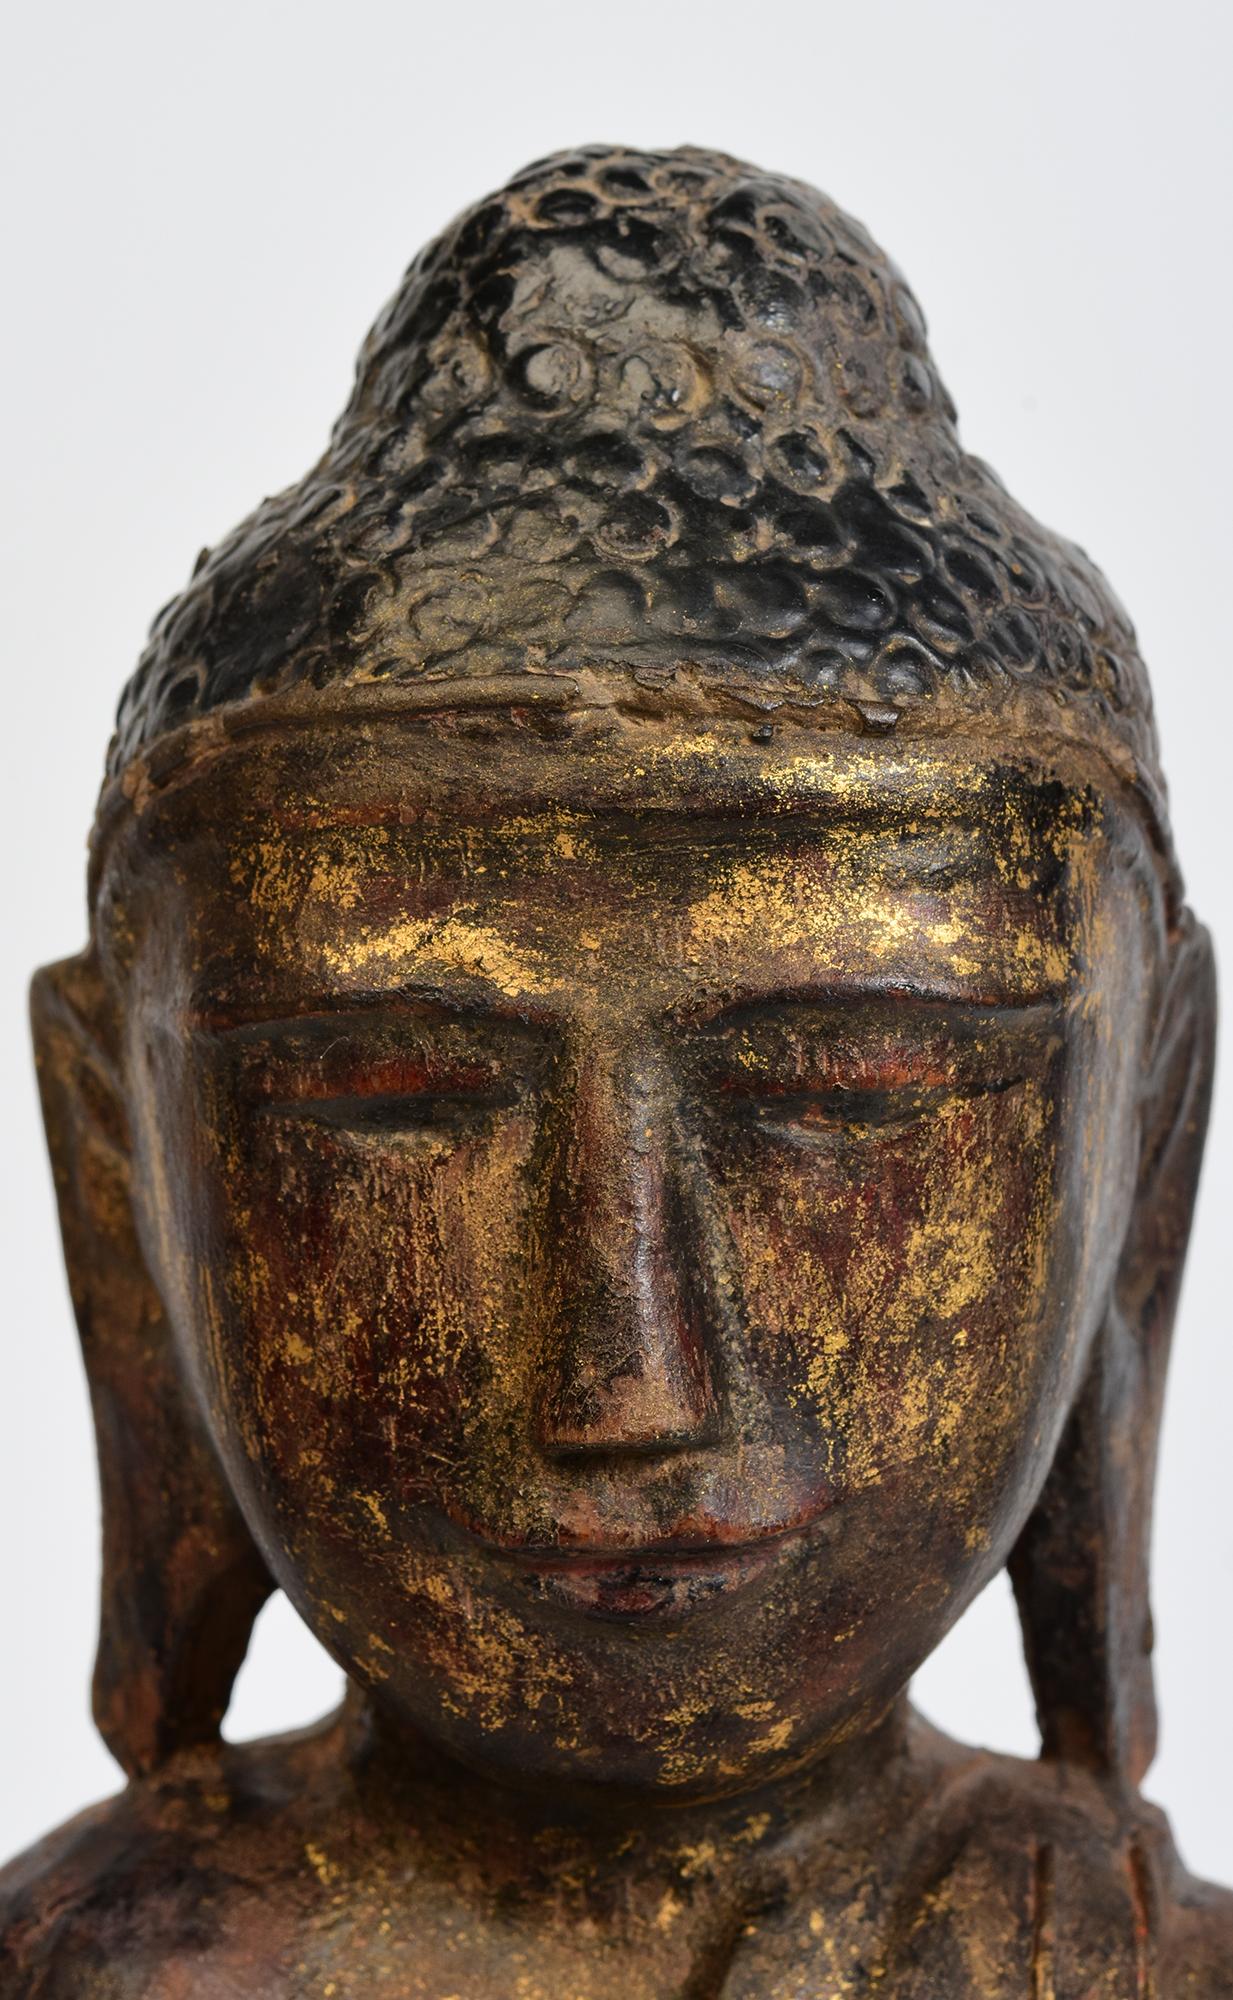 Antique Burmese wooden Buddha sitting in Mara Vijaya (calling the earth to witness) posture on a base.

Age: Burma, Shan Period, 18th Century
Size: Height 44 C.M. / Width 17 C.M. / Depth 8 C.M.
Condition: Nice condition overall (some expected